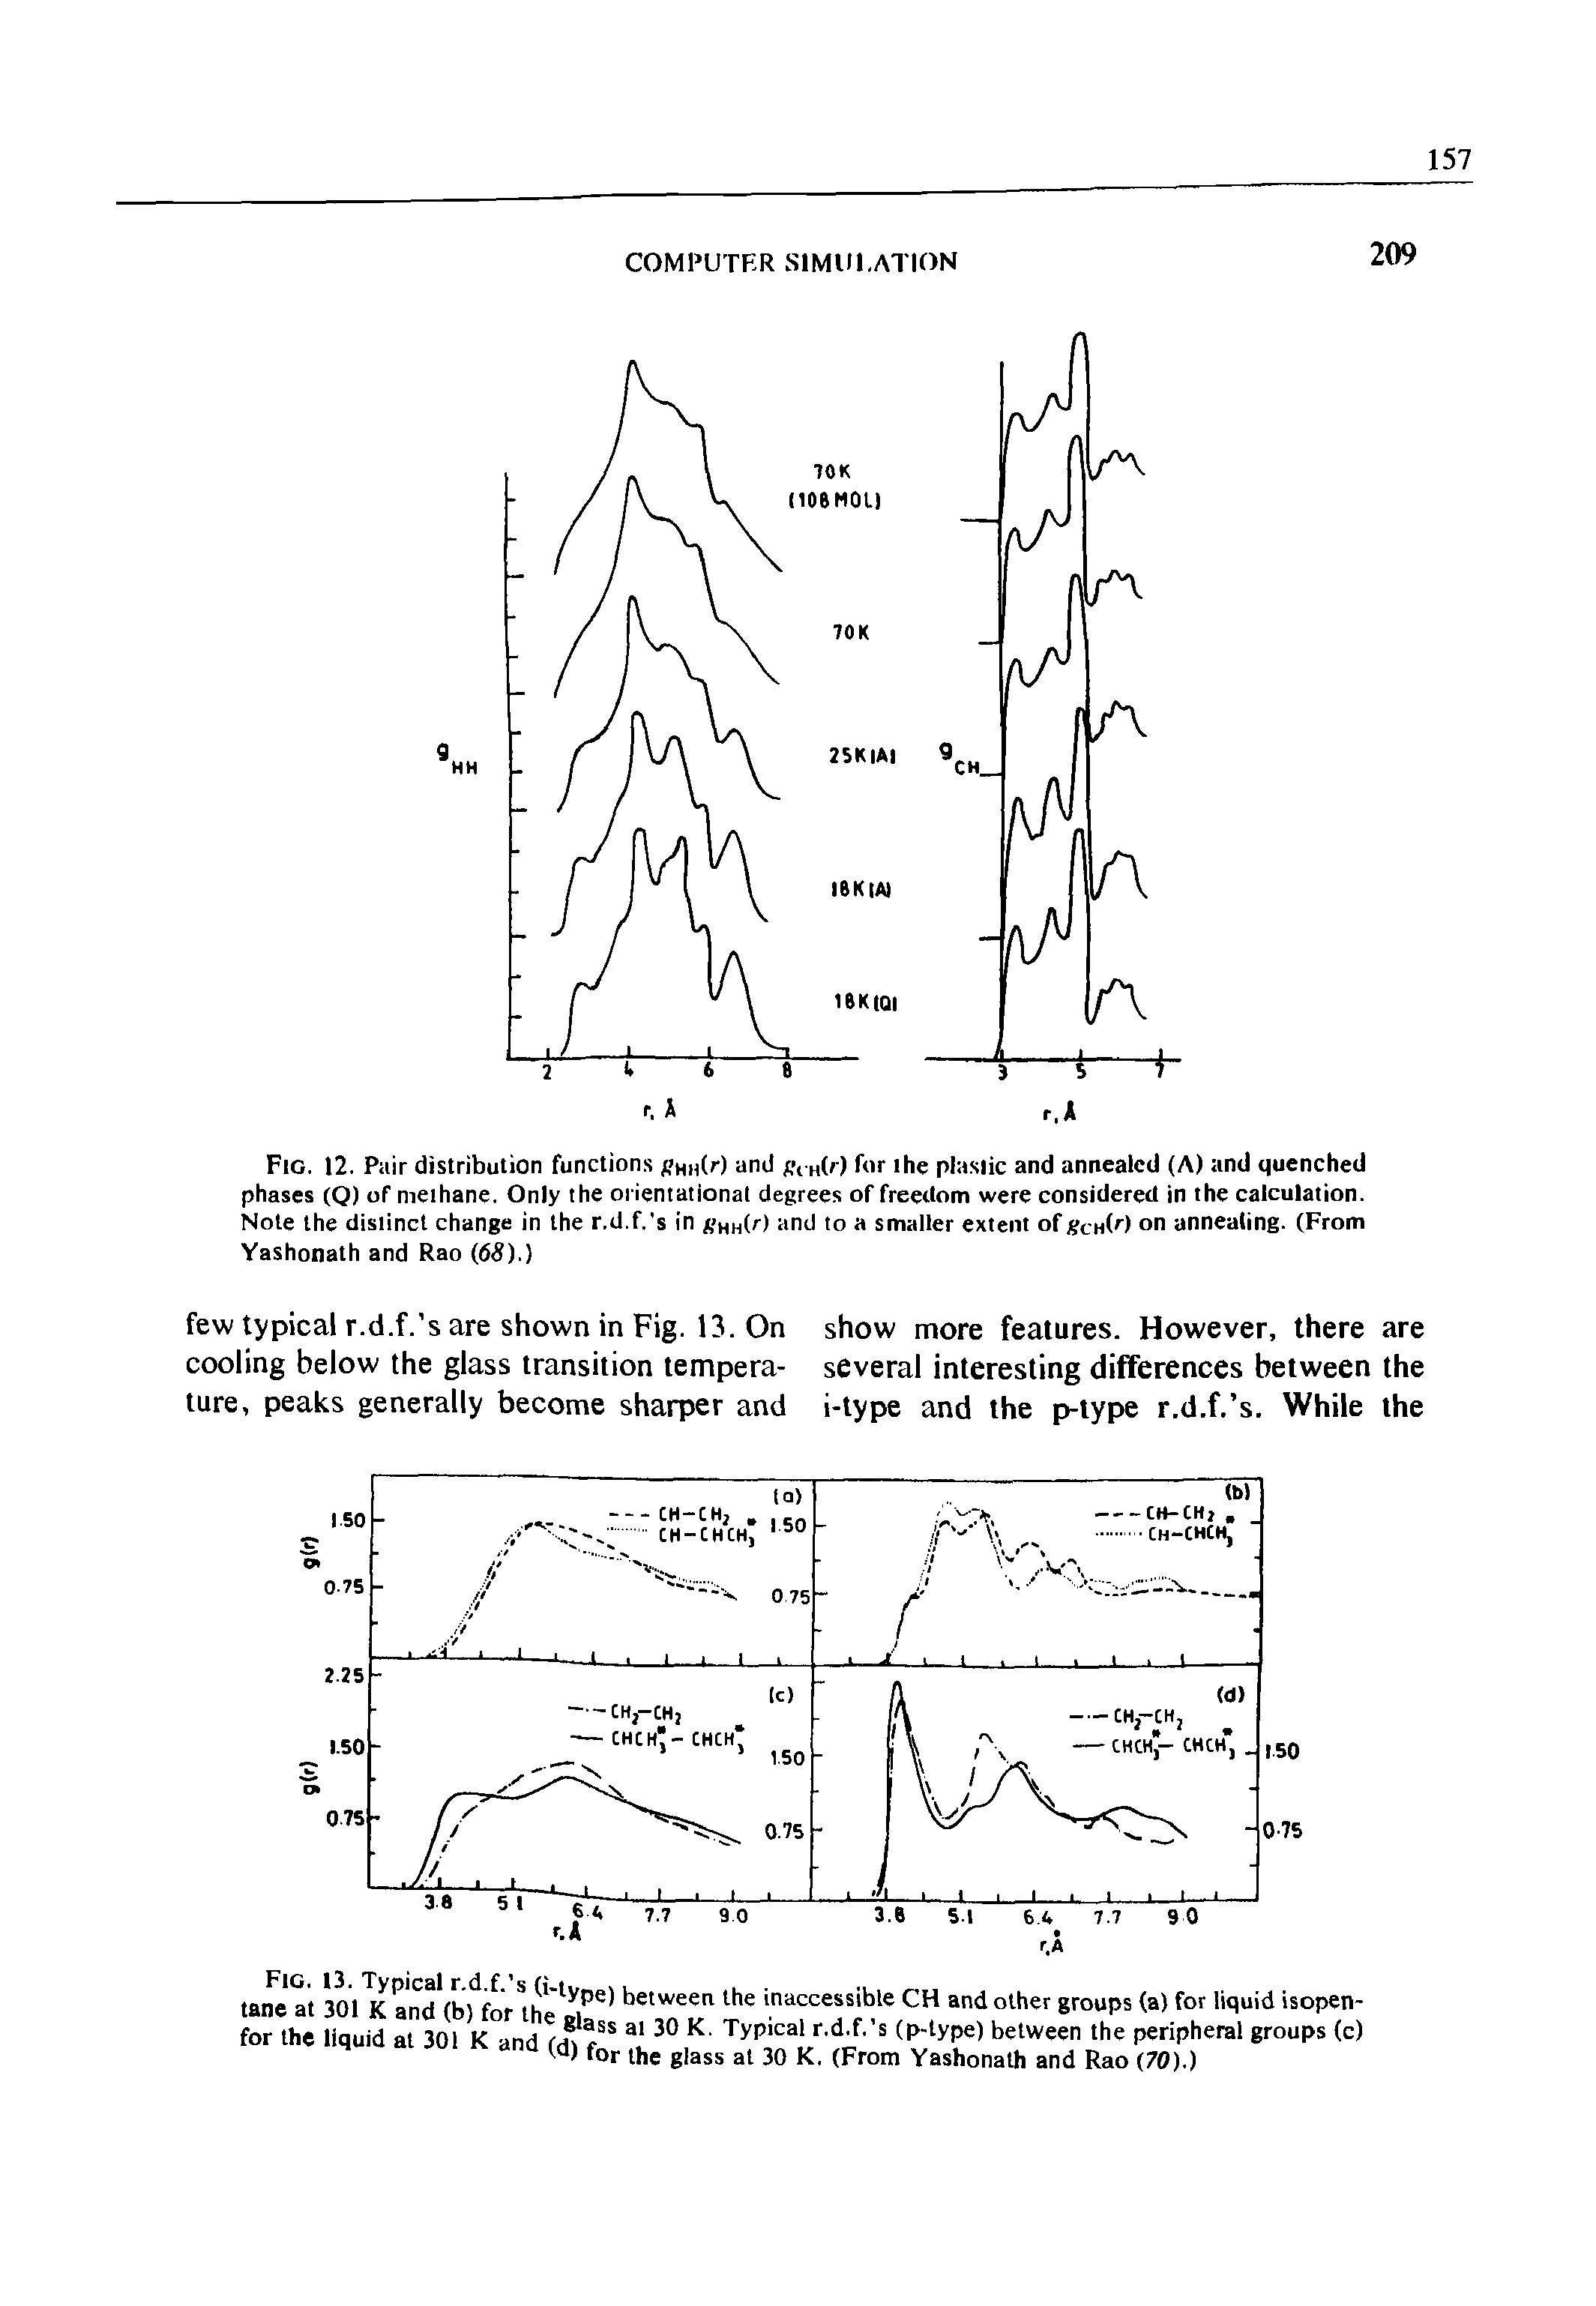 Fig. 12. Pair distribution functions j hhM and ft (/) for the plastic and annealed (A) and quenched phases (Q) of methane. Only the orientational degrees of freedom were considered in the calculation.